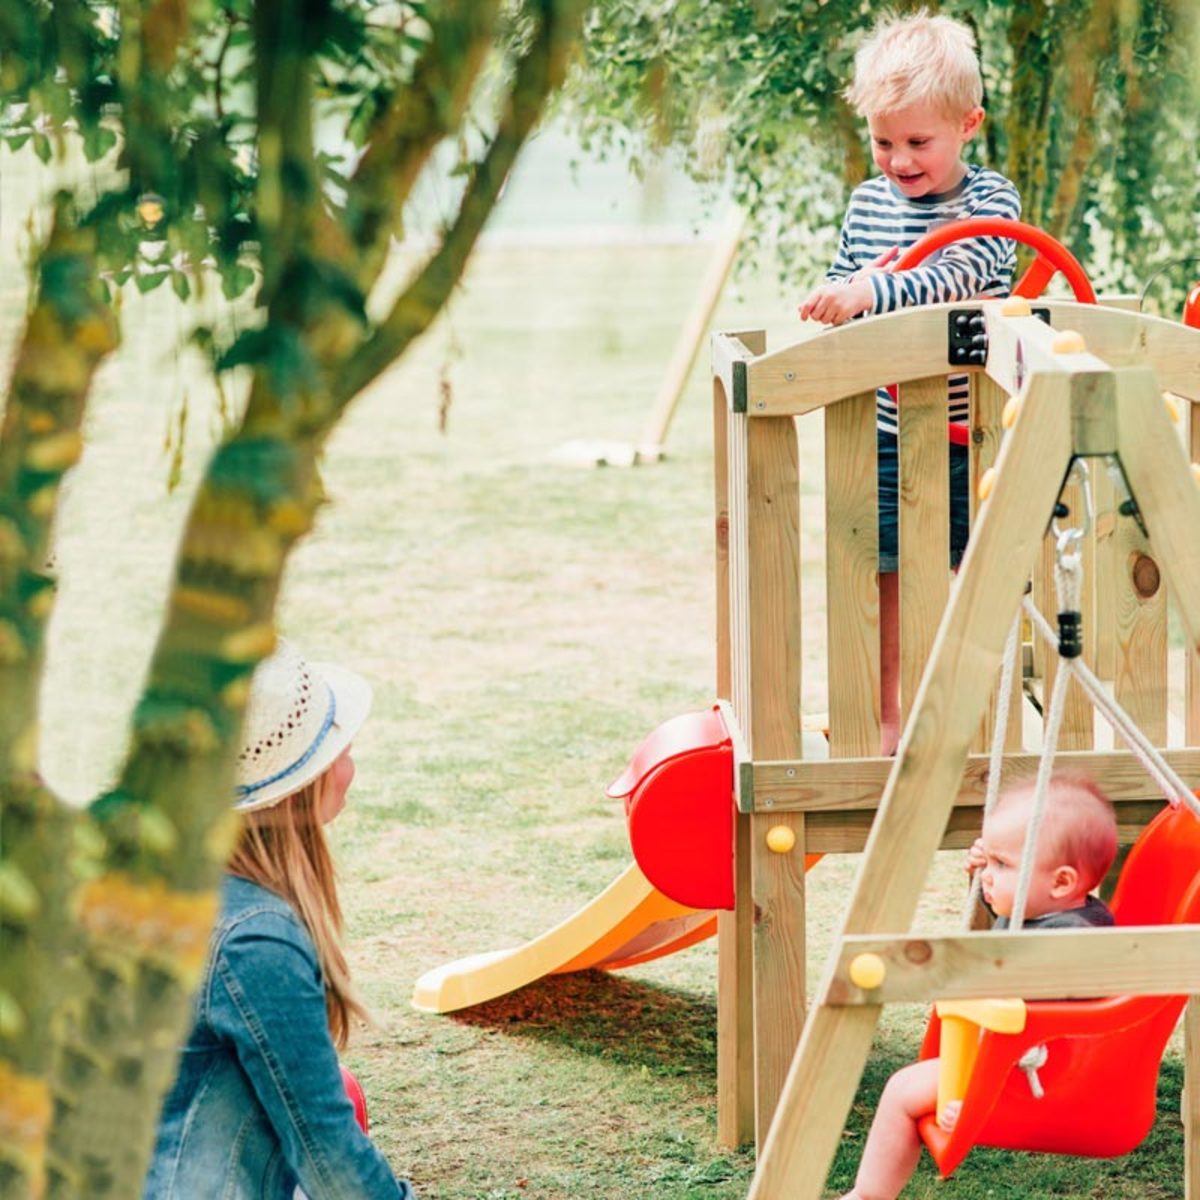 Plum Toddlers Tower Wooden Play Centre (1+ Years)Plum Toddlers Tower Wooden Play Centre (1+ Years)